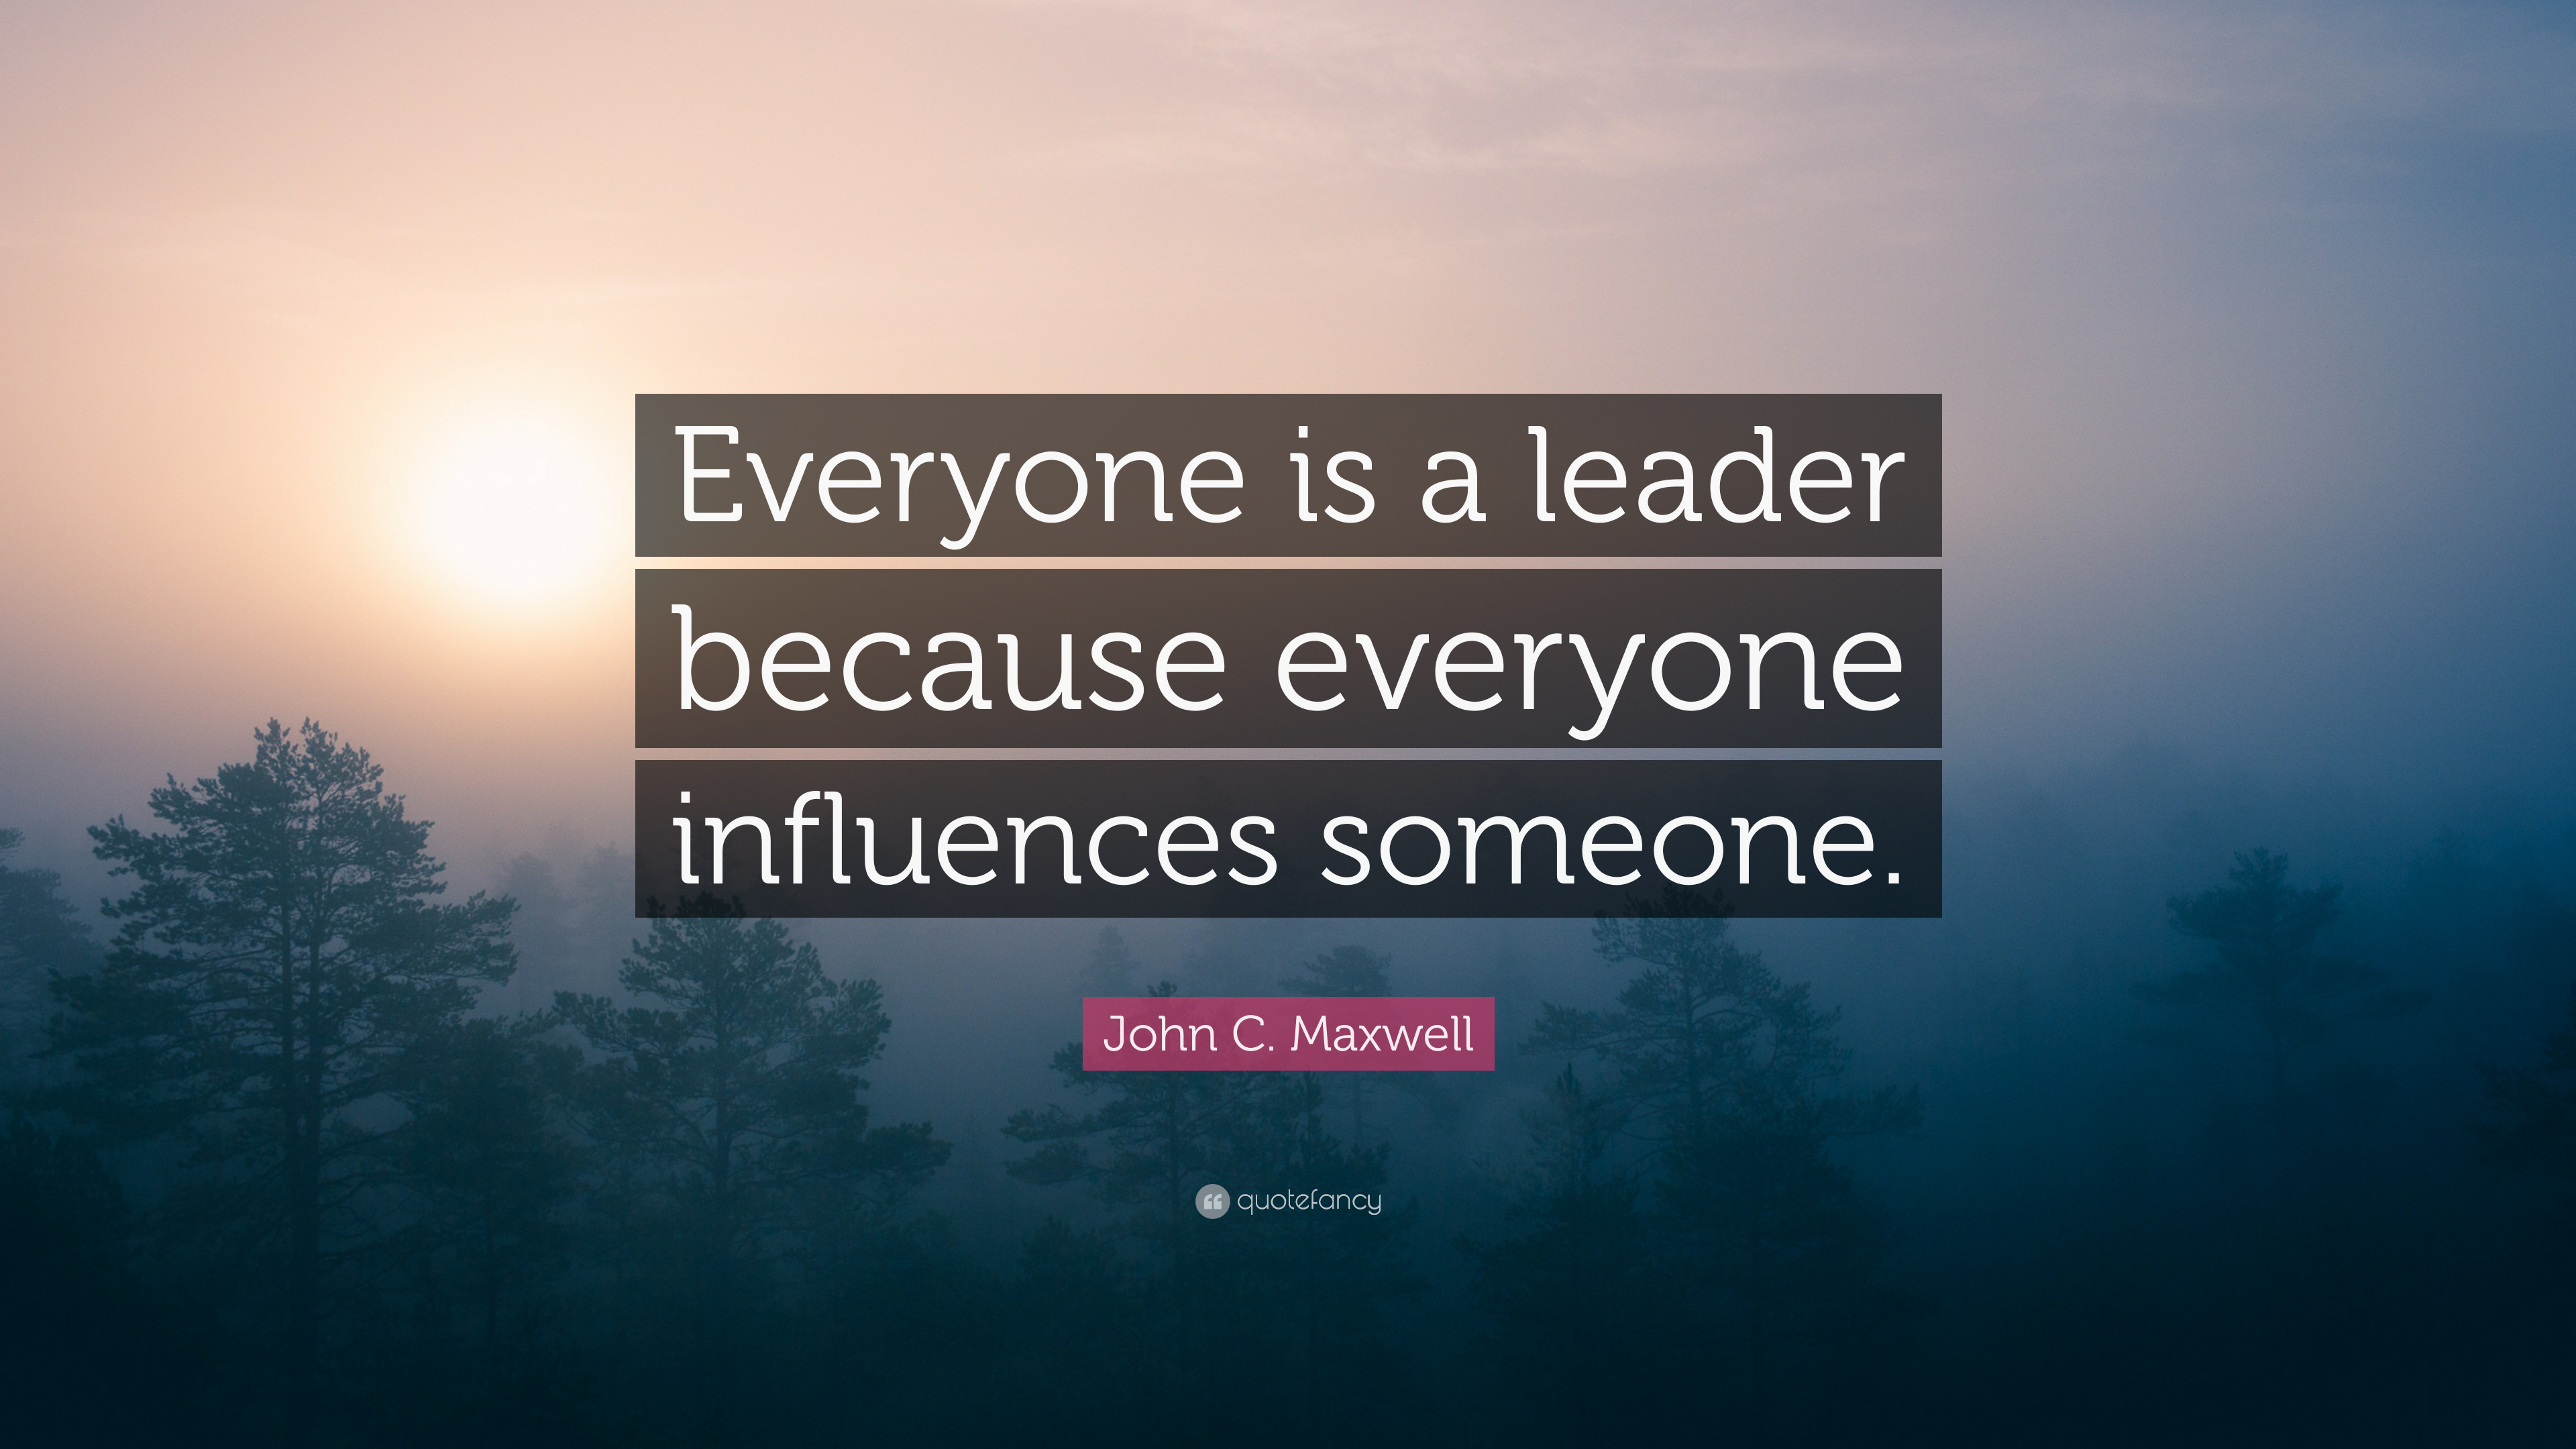 John C Maxwell Leadership Quotes
 John C Maxwell Quote “Everyone is a leader because